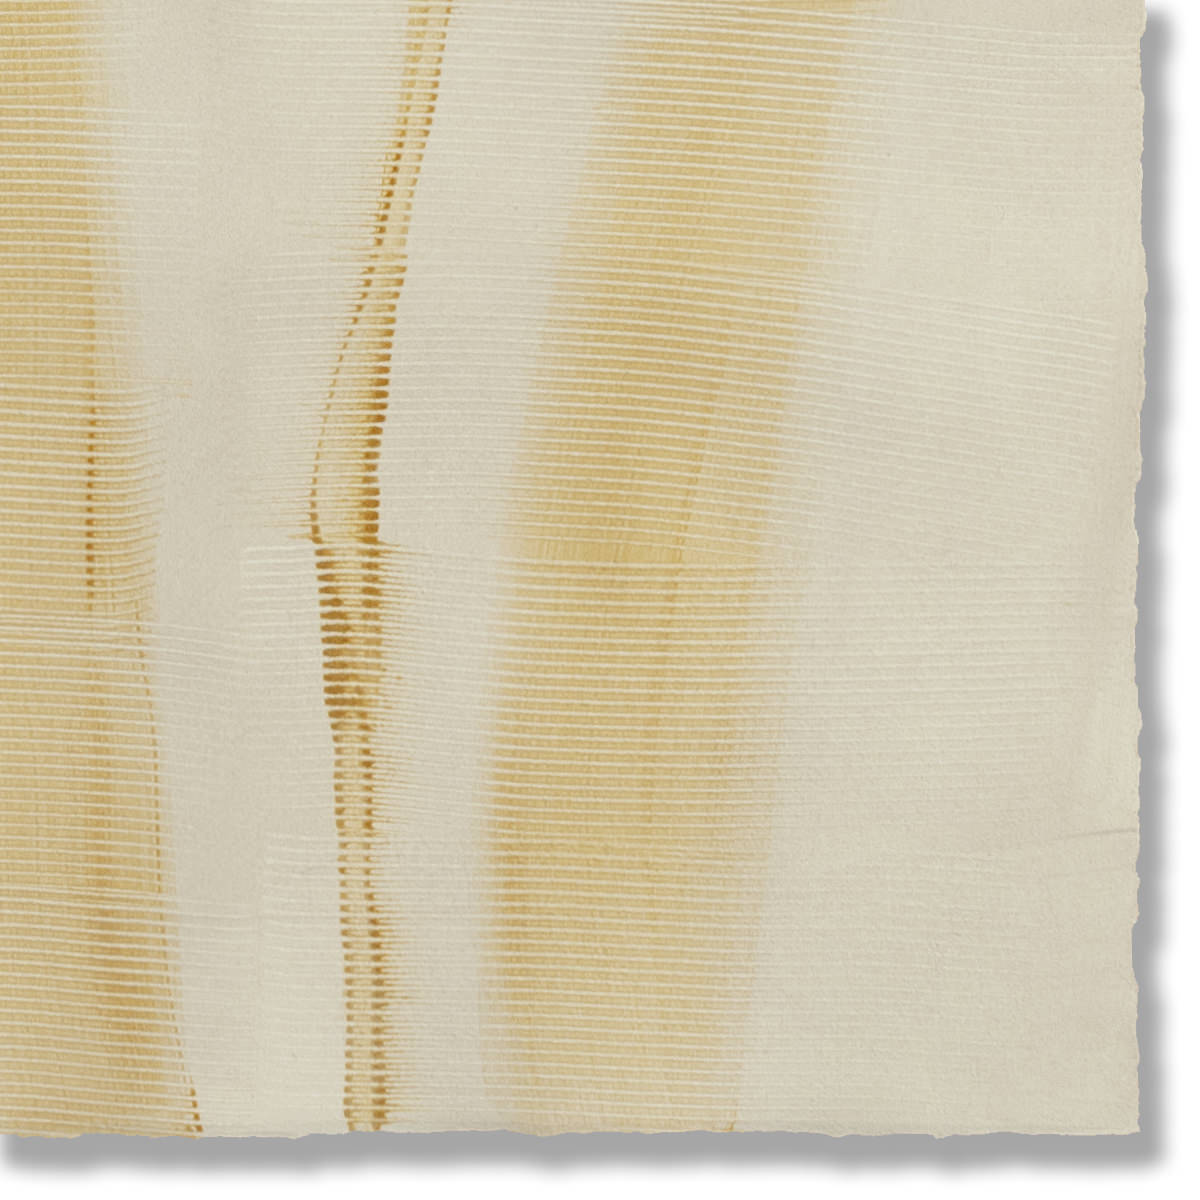 Detail of a handmade wallpaper swatch with an irregular combed stripe pattern in ochre on a tan field.